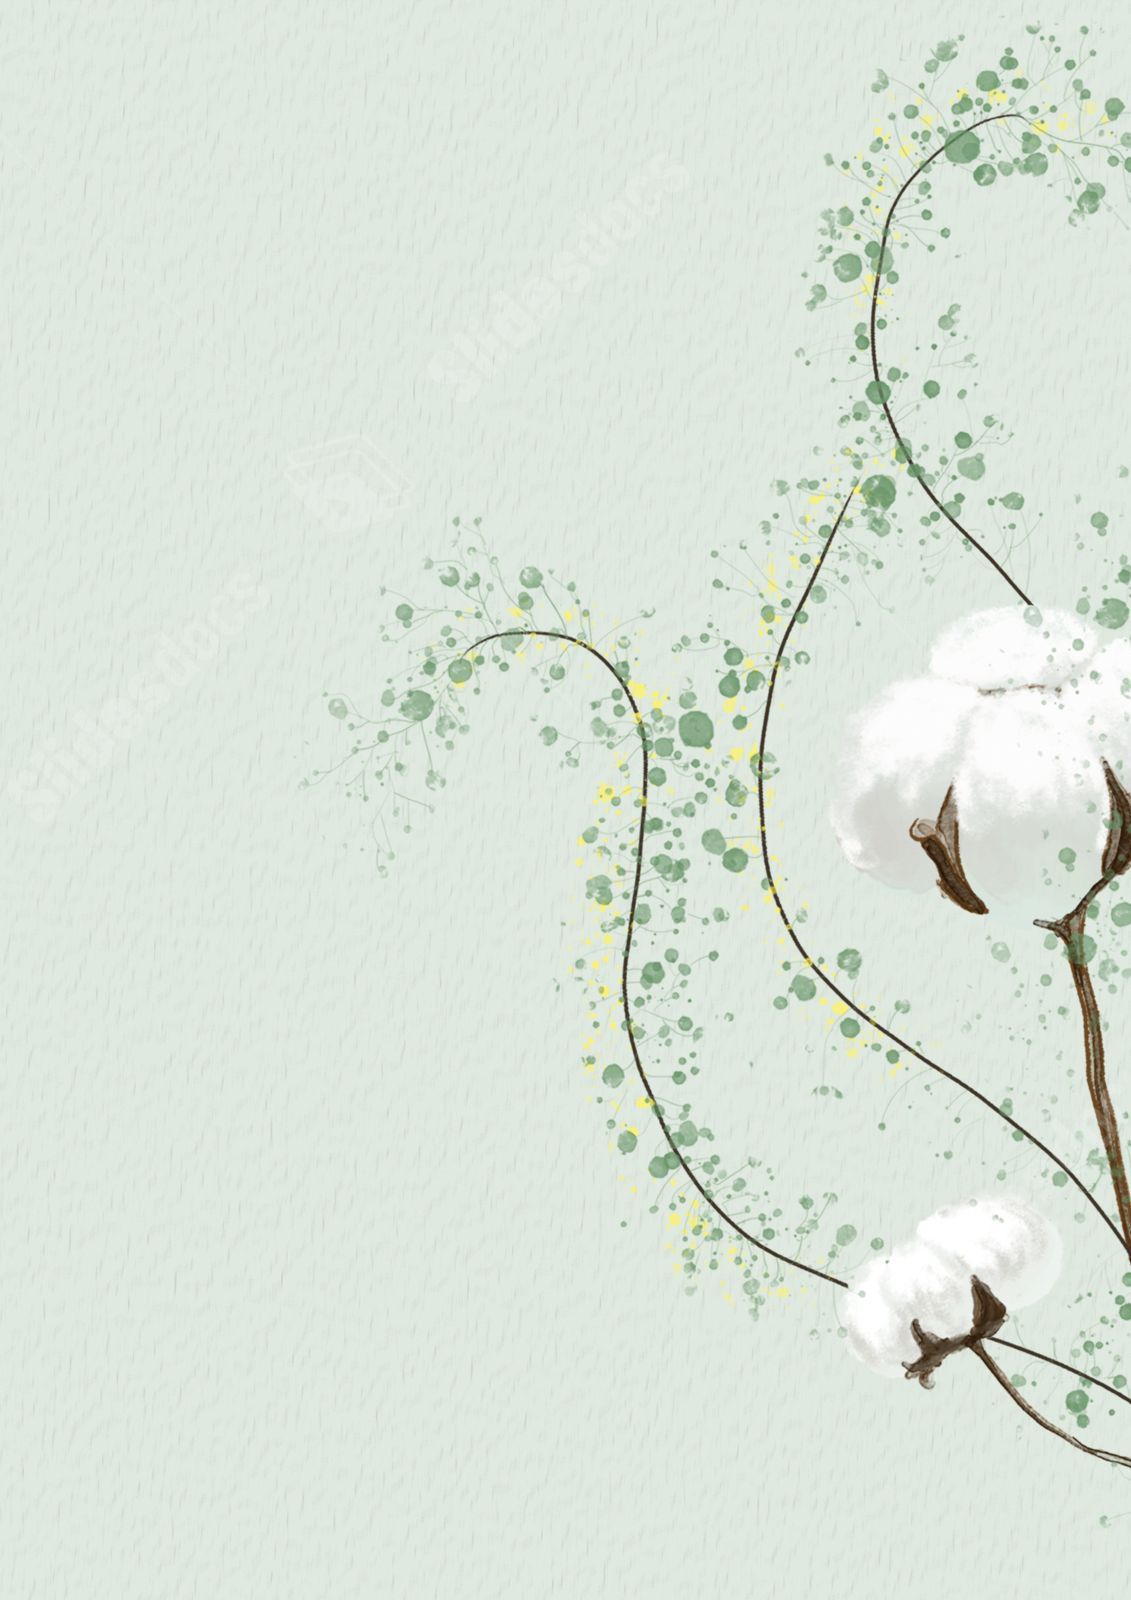 A cotton plant on a green background - Border